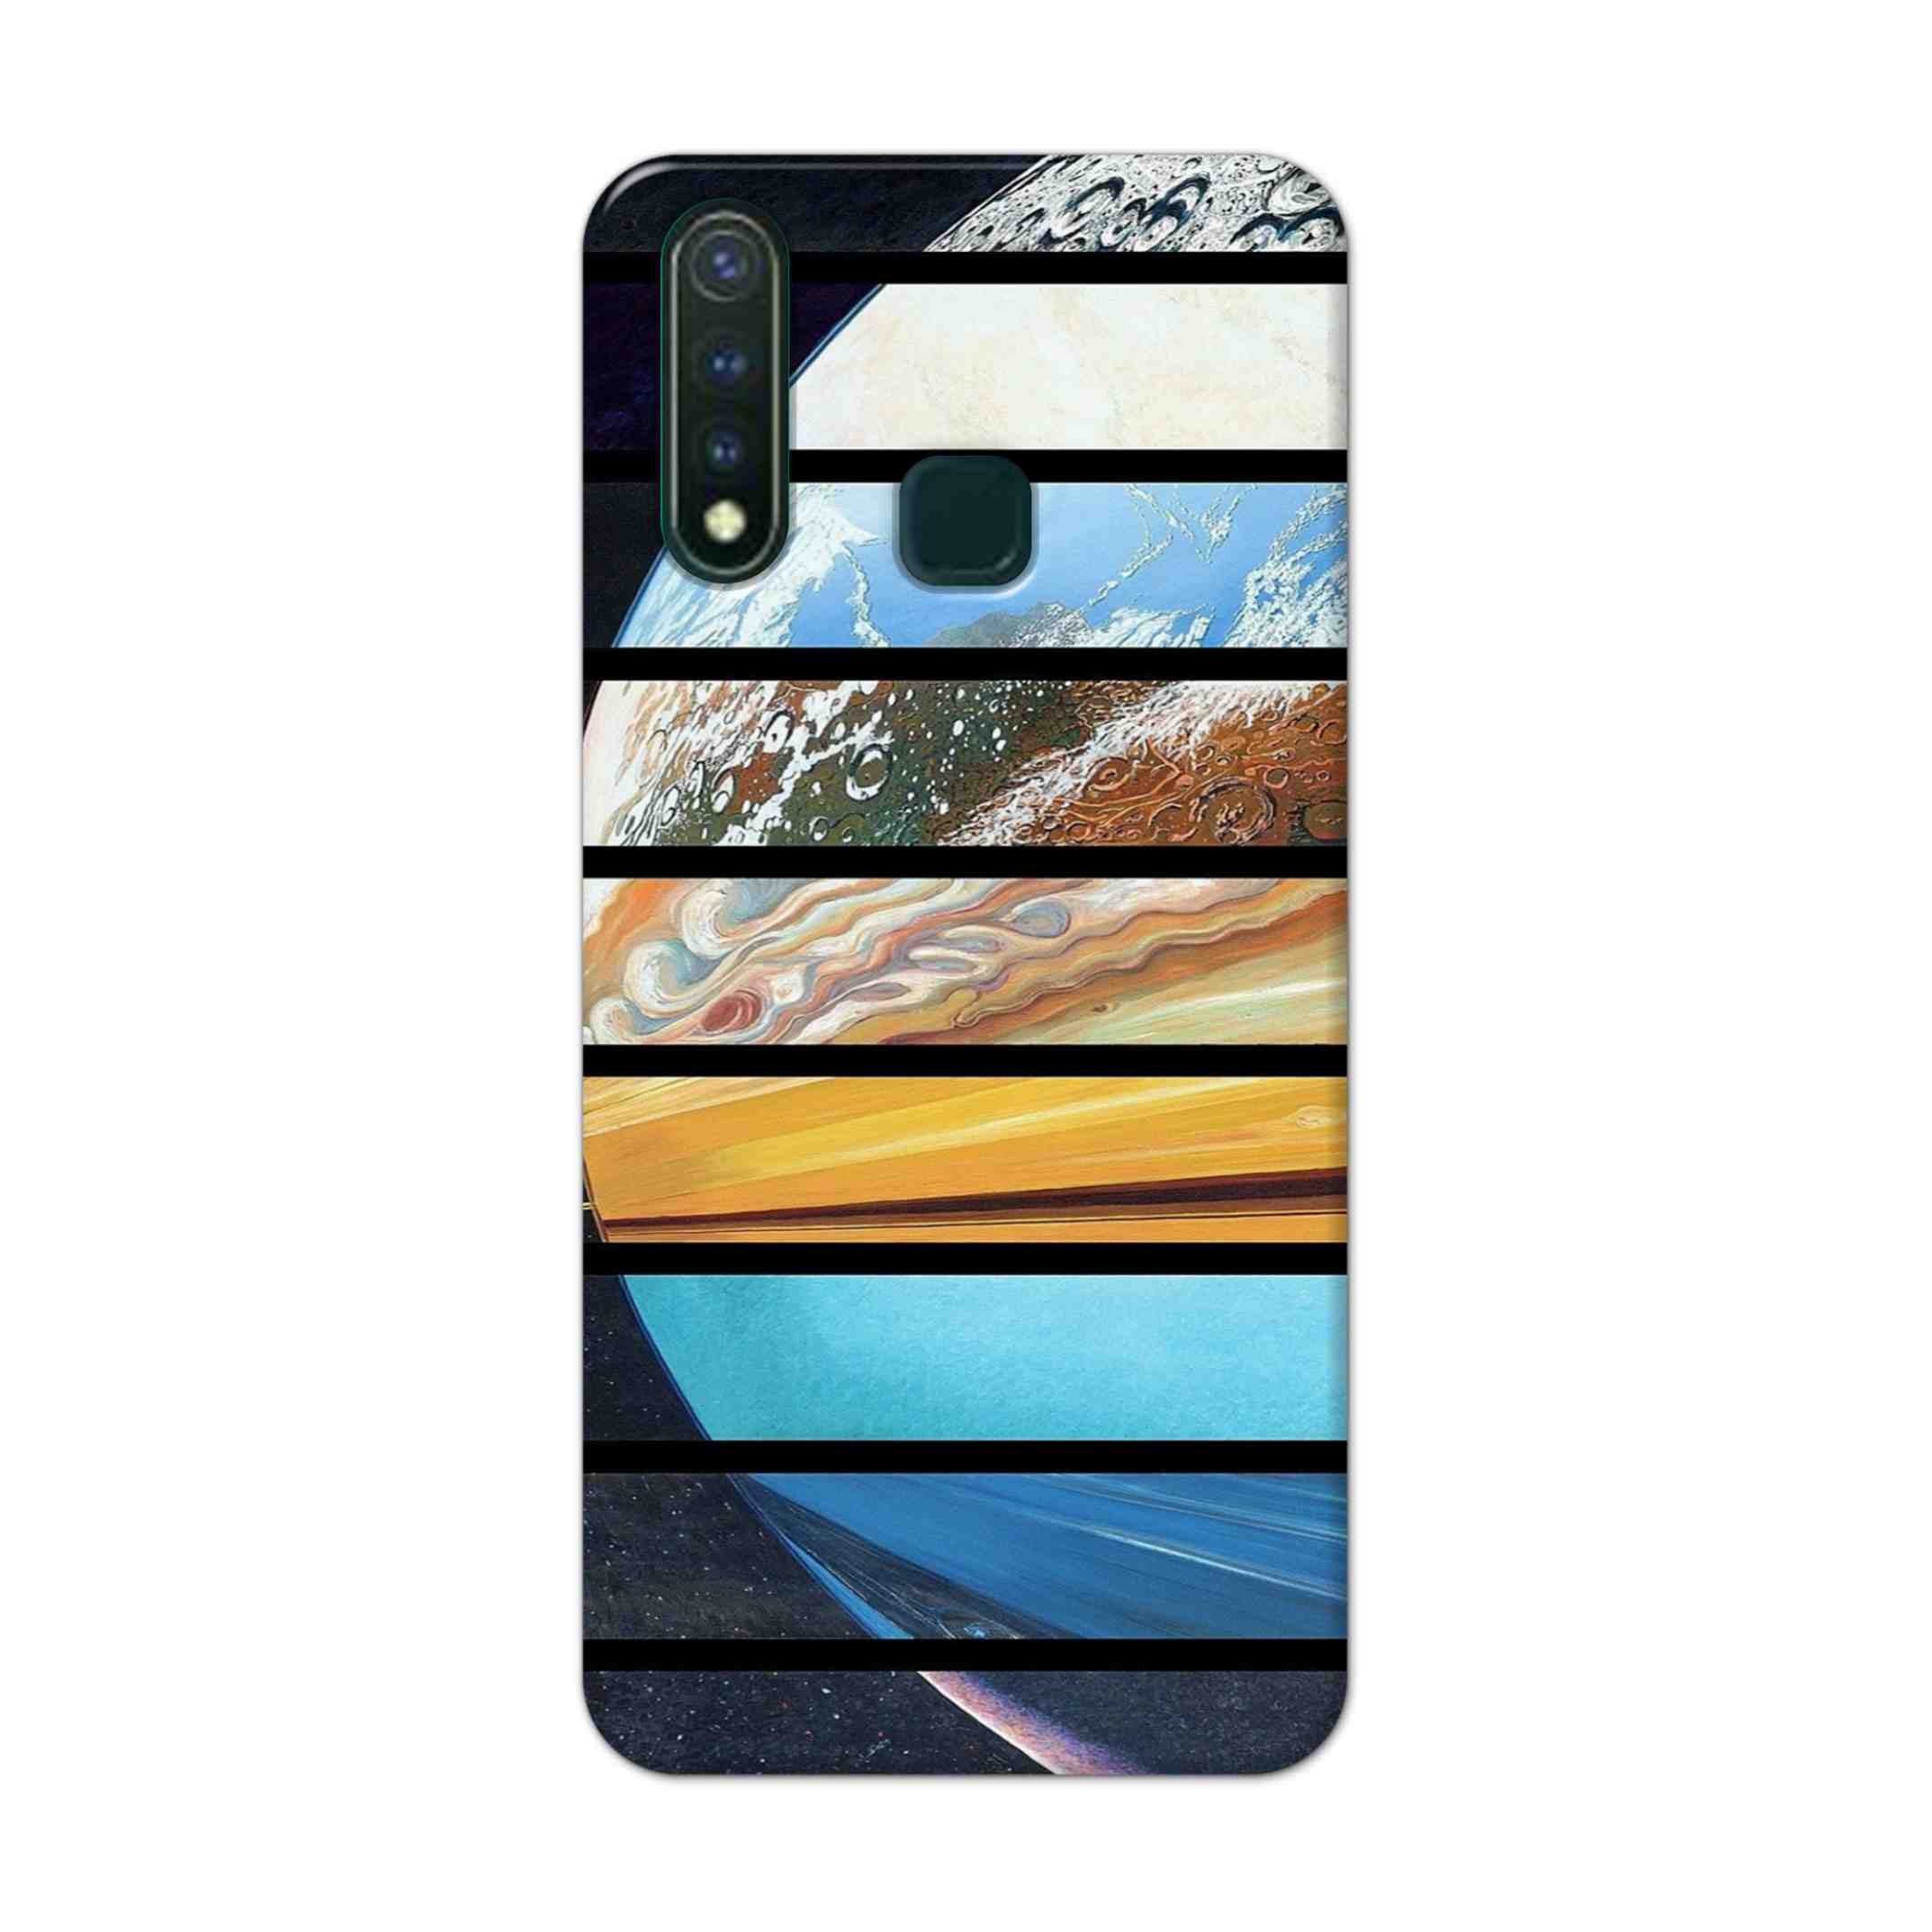 Buy Colourful Earth Hard Back Mobile Phone Case Cover For Vivo Y19 Online